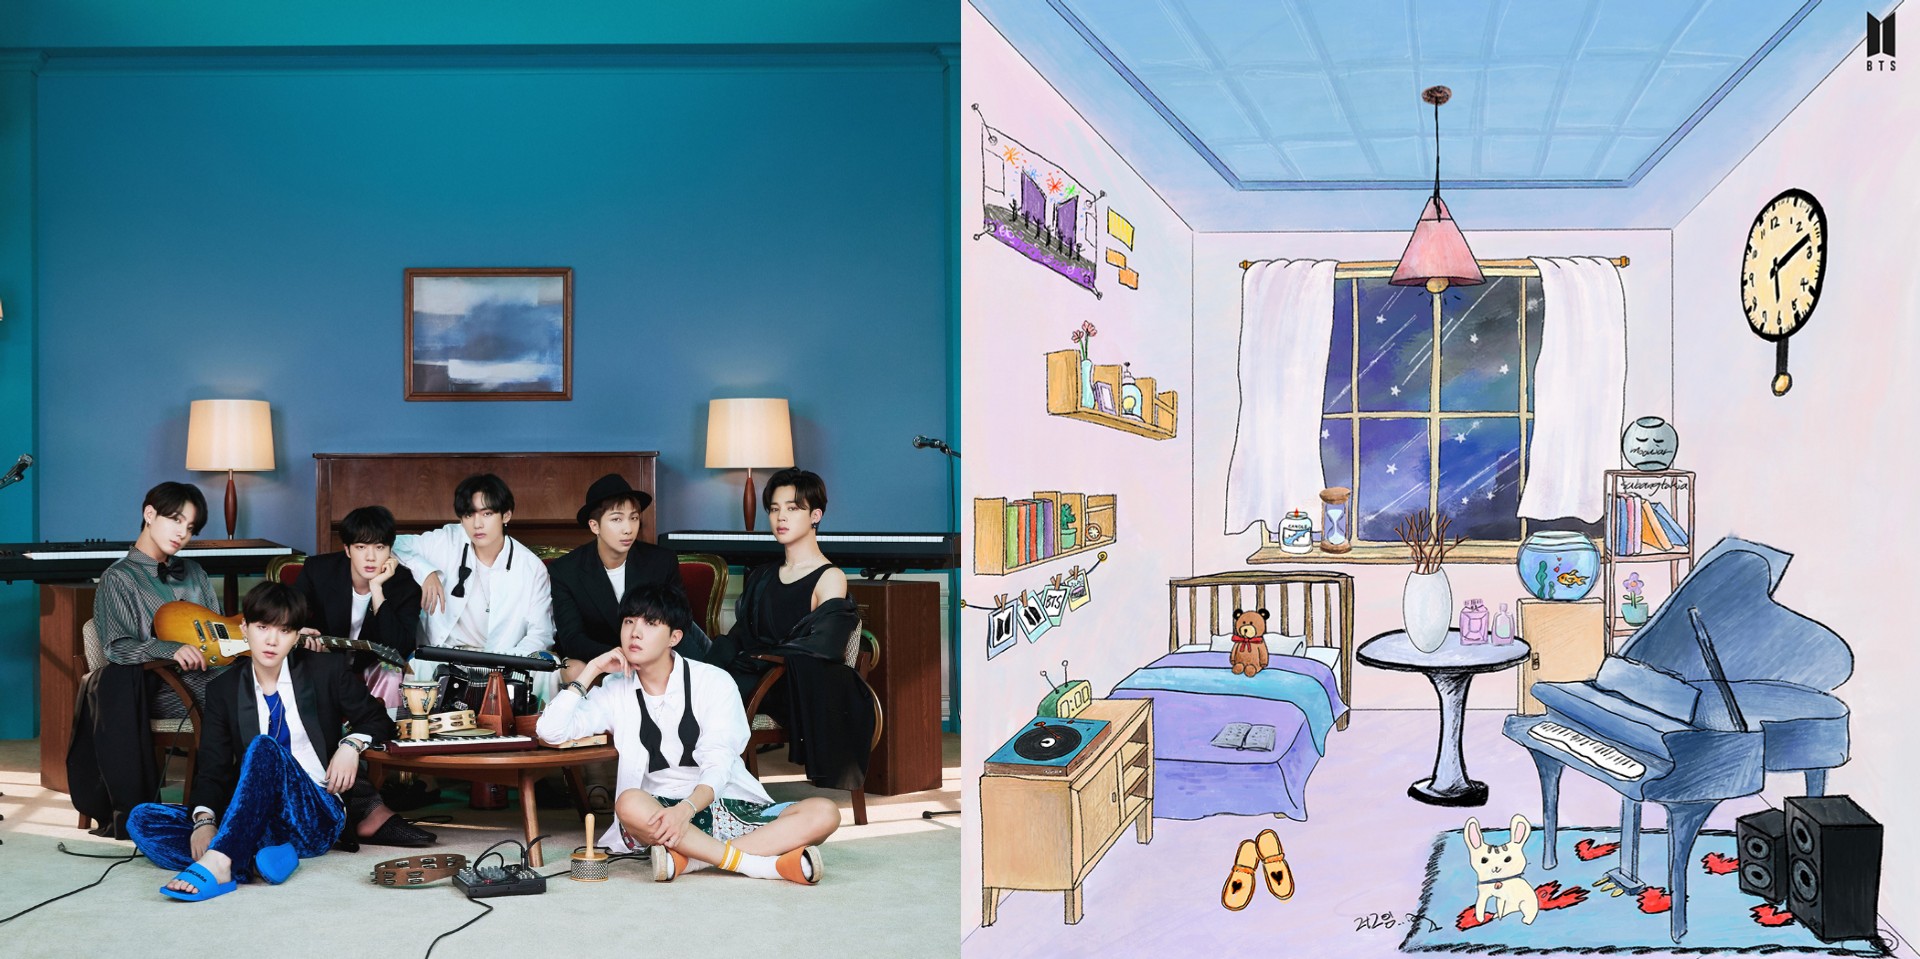 Create your own 'BE' room with items curated by BTS